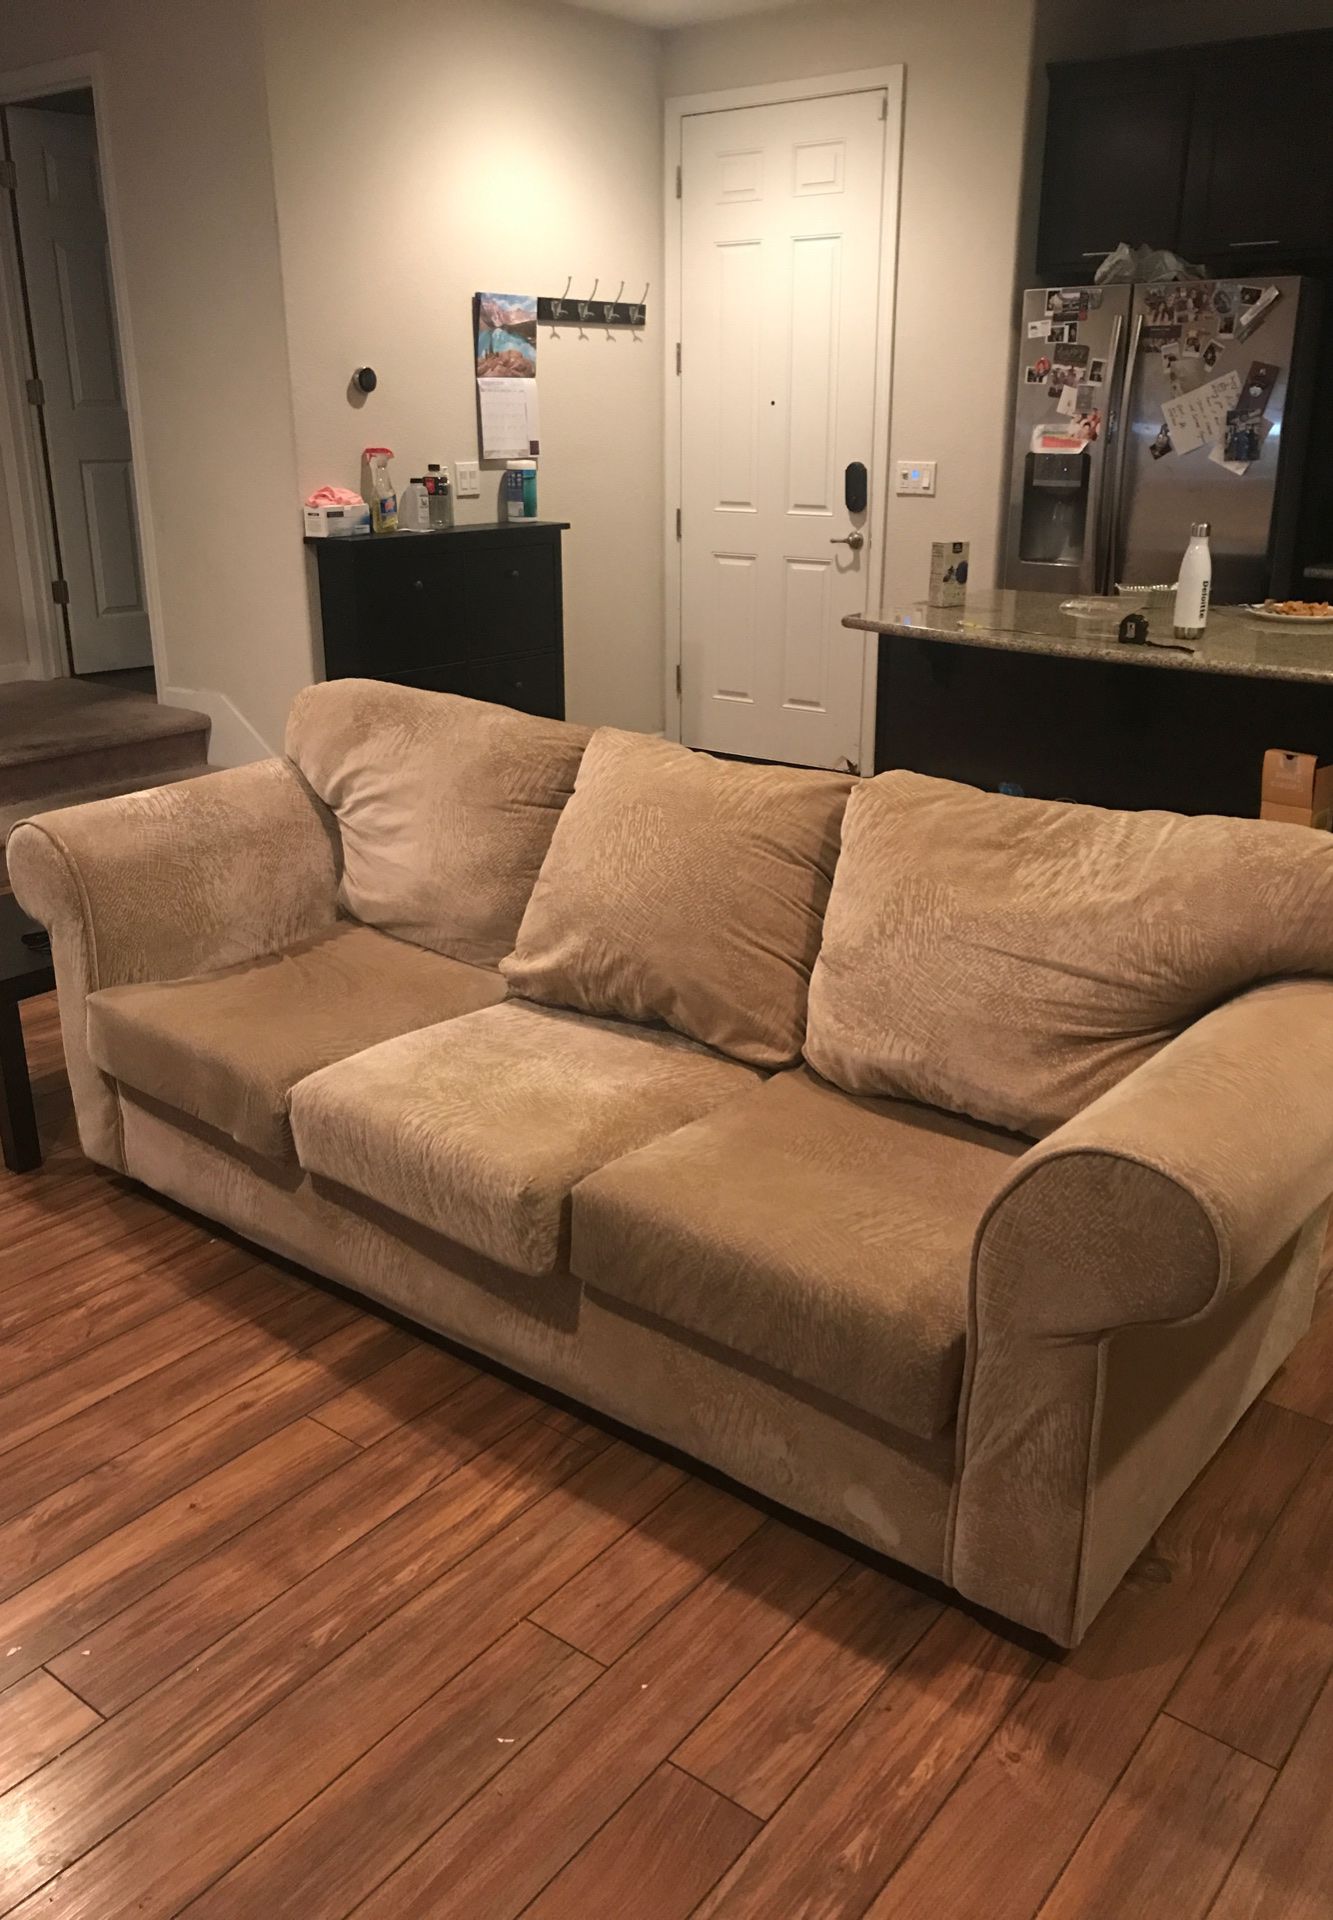 Couch in great condition- pickup by 9/26!